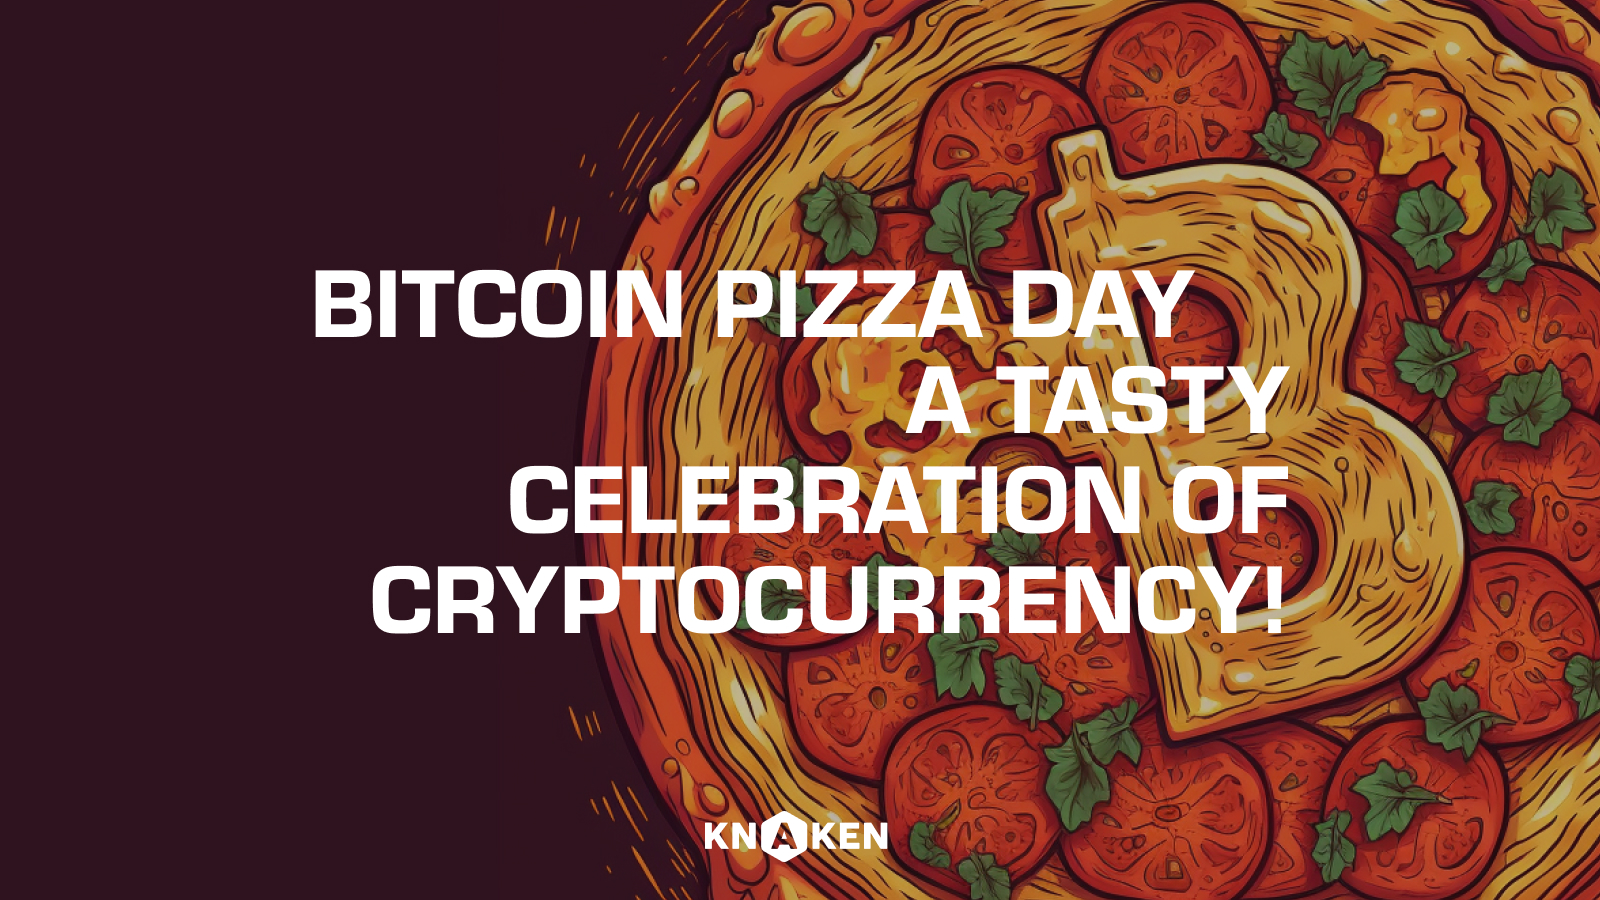 Bitcoin Pizza Day: A tasty celebration of cryptocurrency!